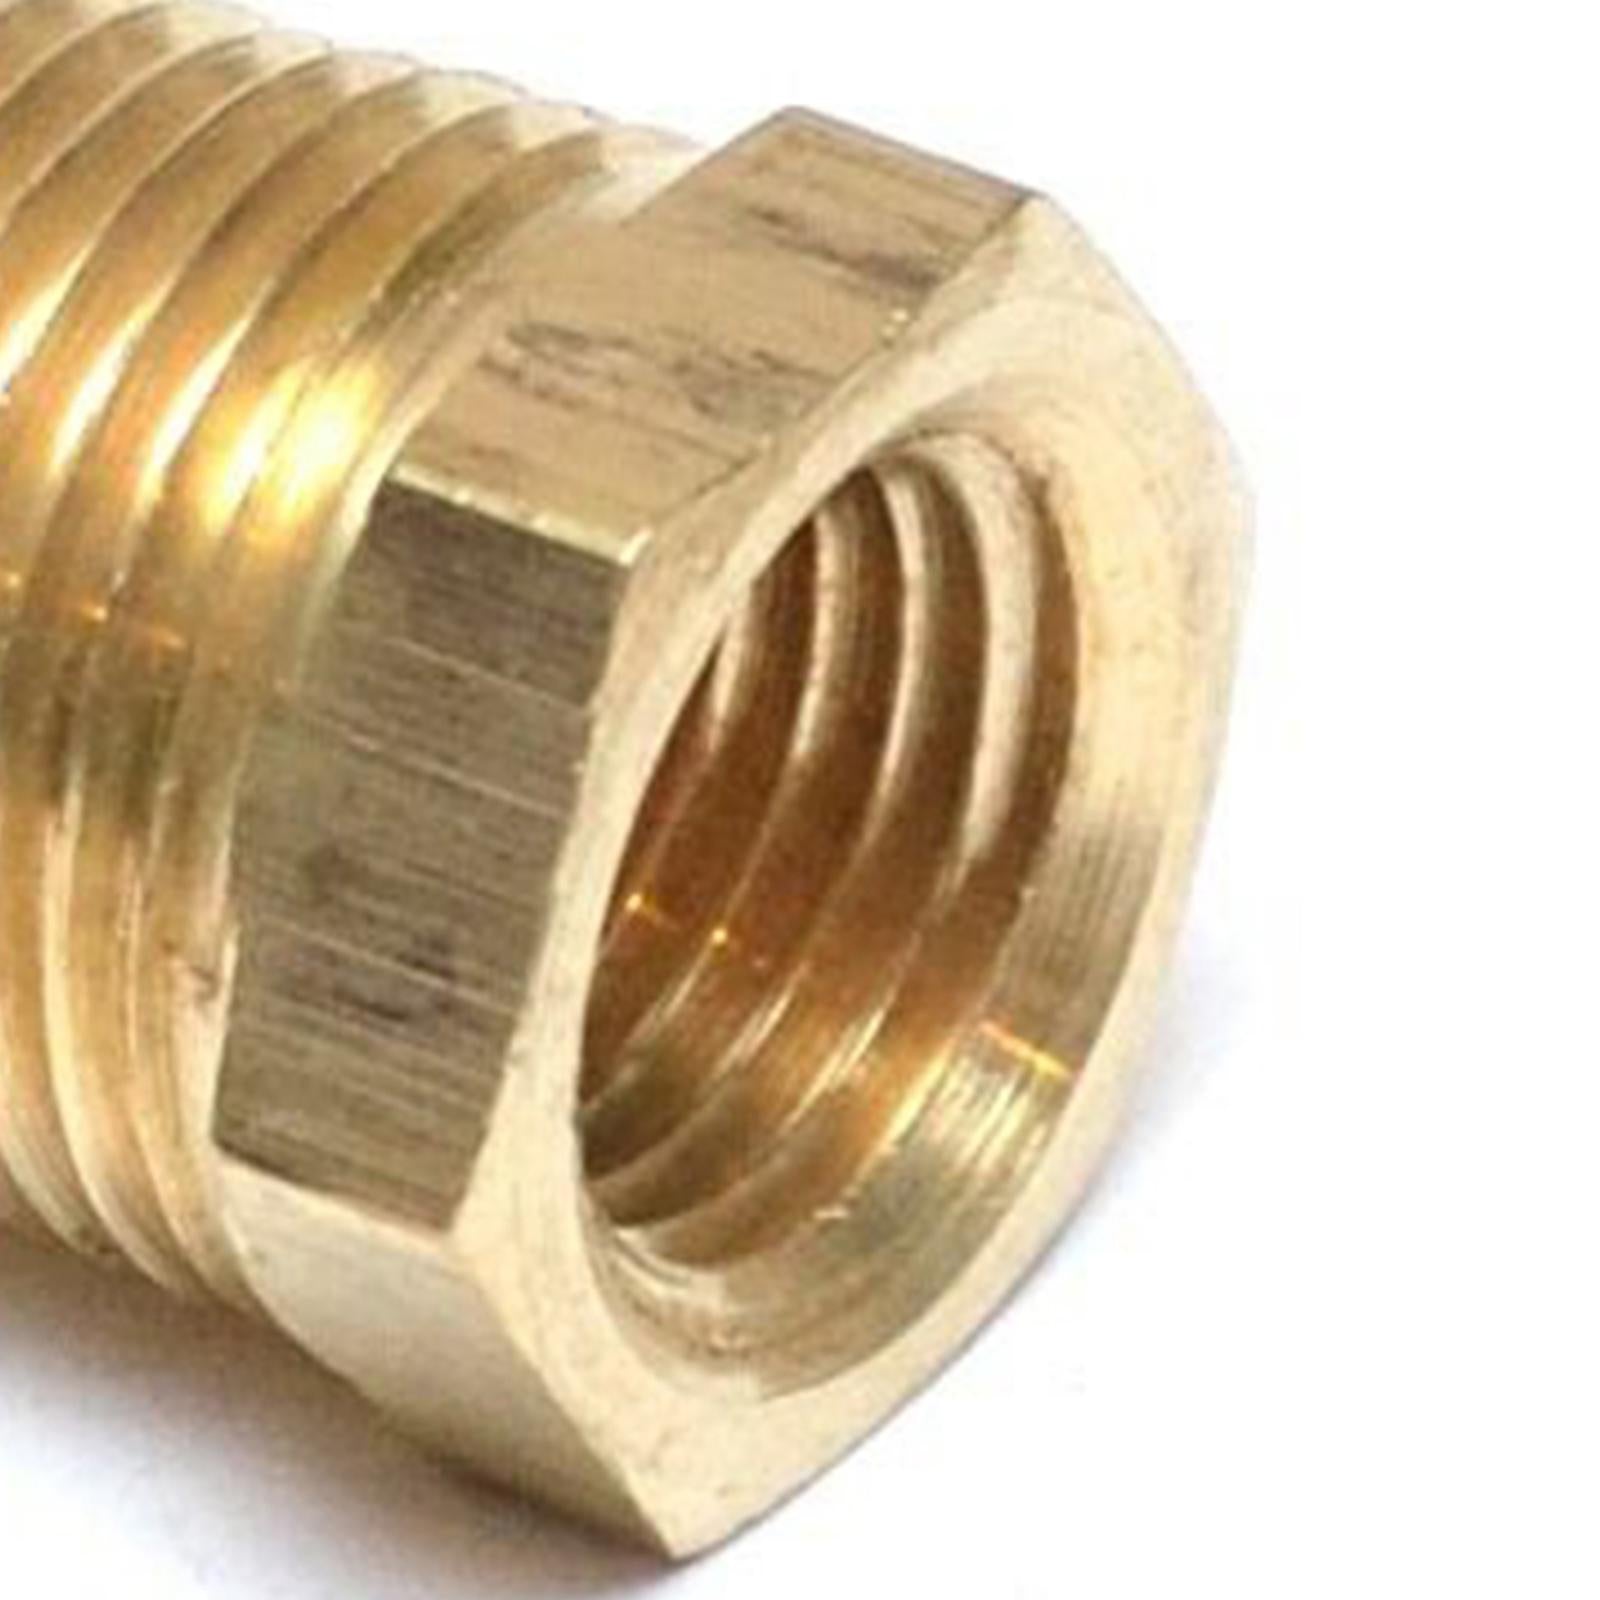 NPT Adapter 3/8 Male to 1/8 Female Npt Brass Pipe for Pressure Gauge Adapter